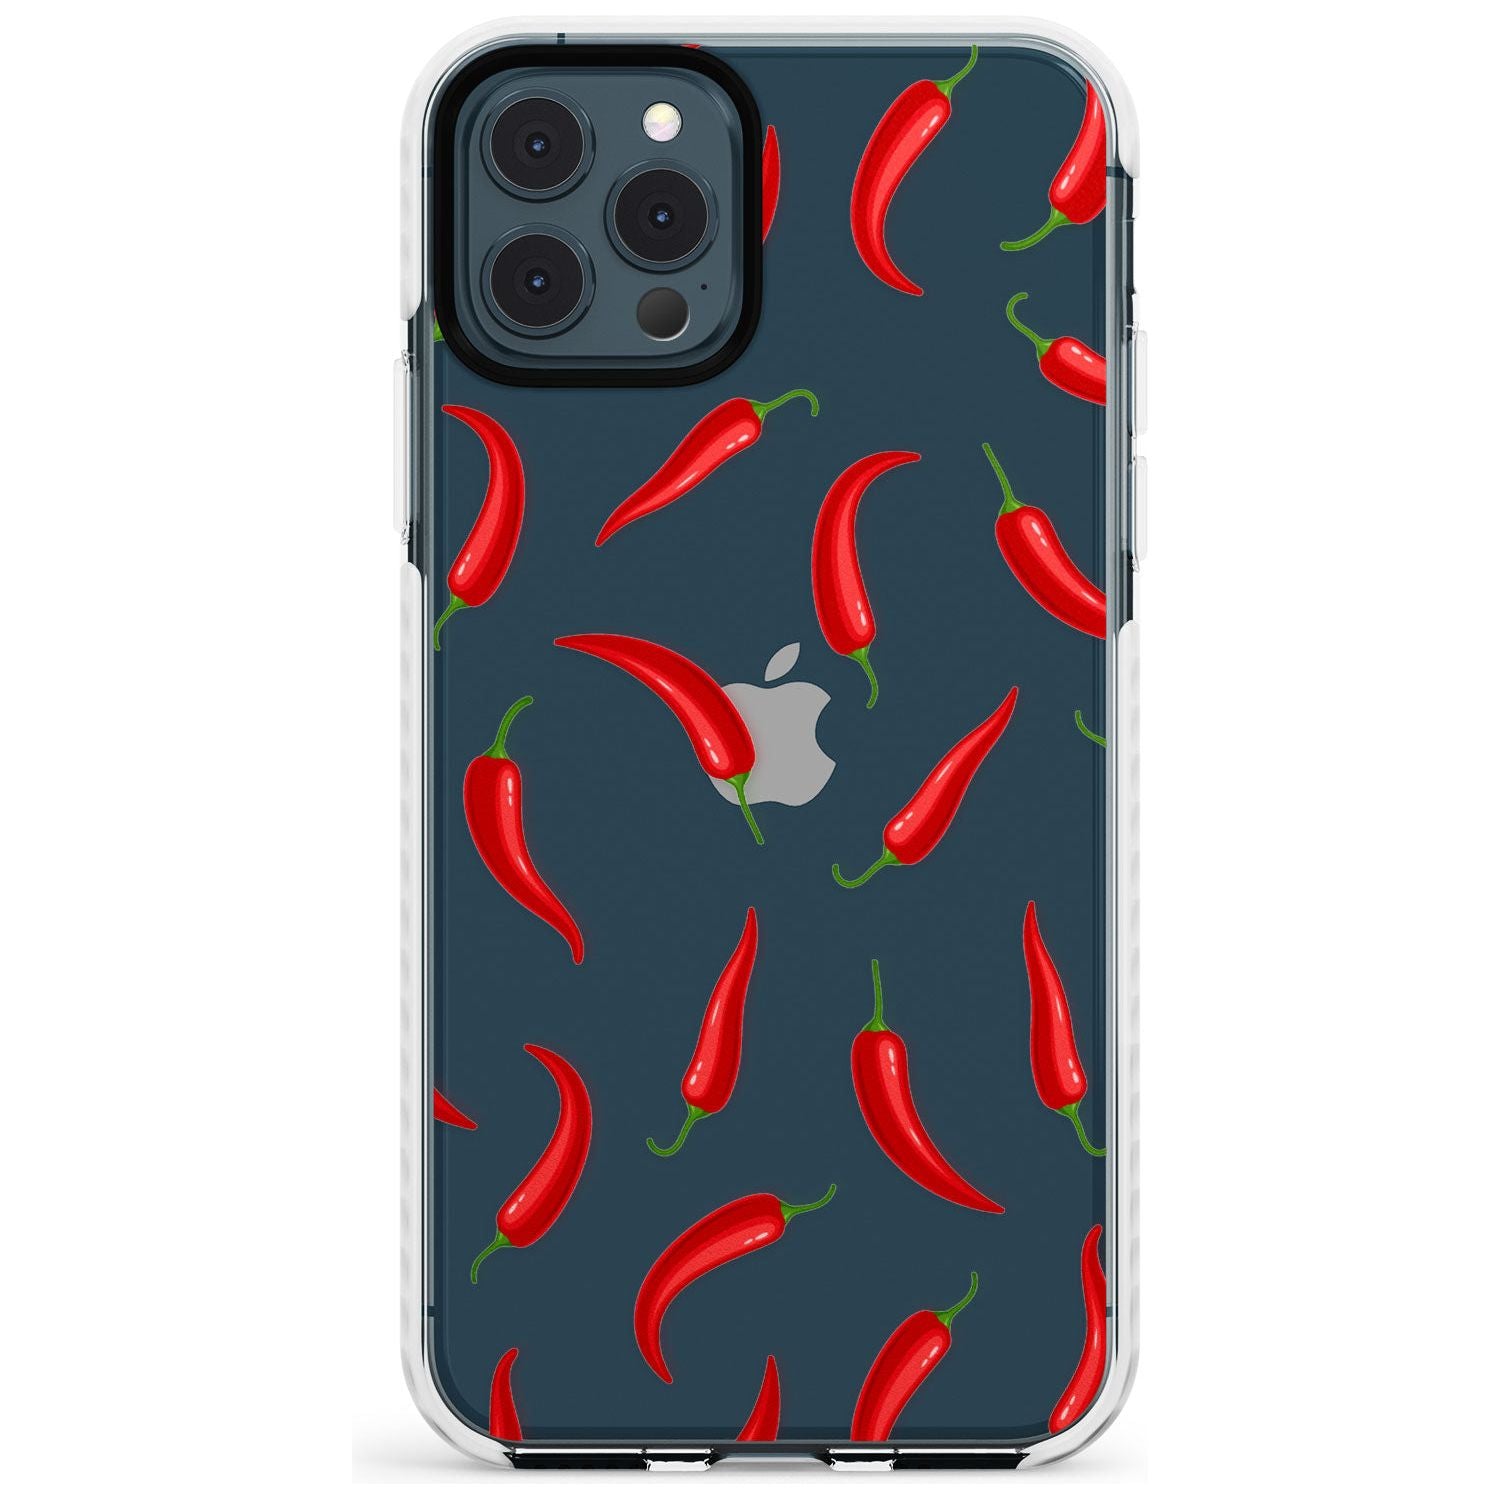 Chilly Pattern Impact Phone Case for iPhone 11 Pro Max